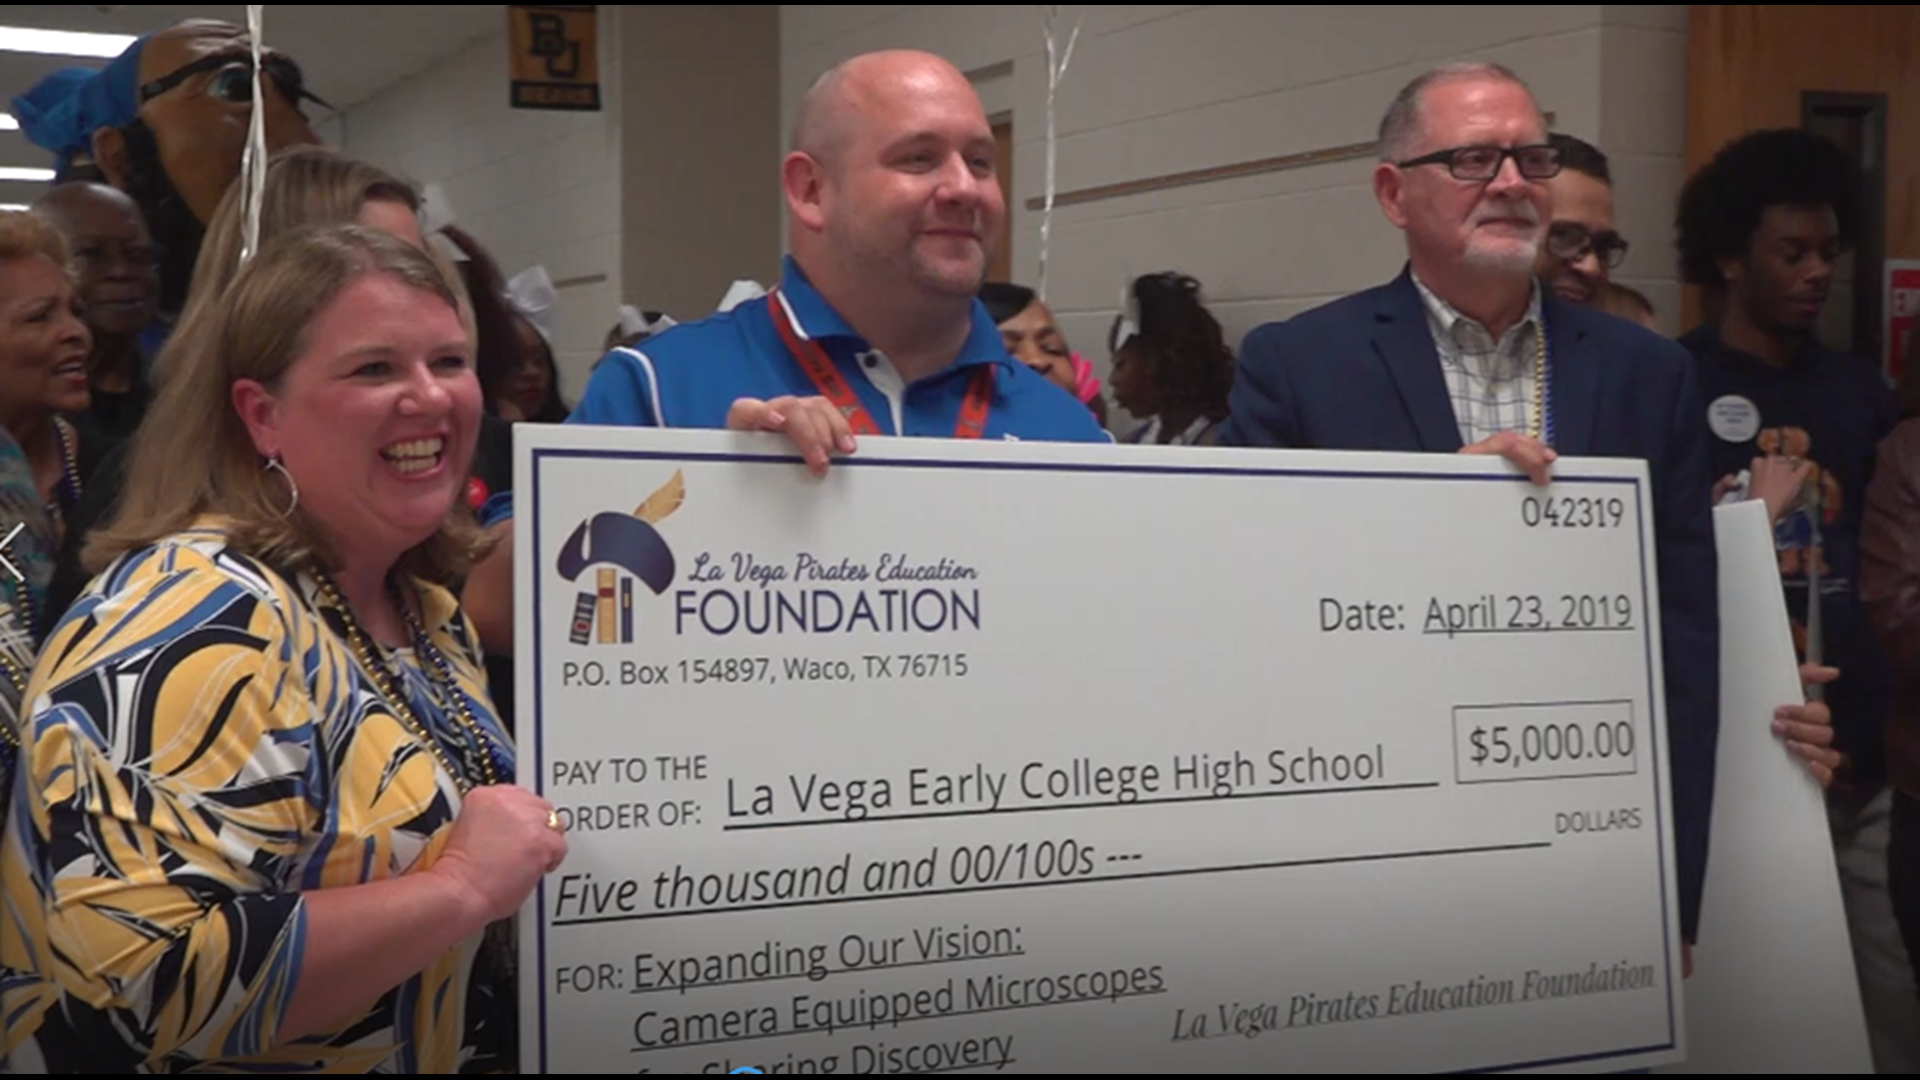 The La Vega Pirates Education Foundation awarded a total of $48,167.30 through 13 teacher grants Tuesday, the foundation said in a press release.